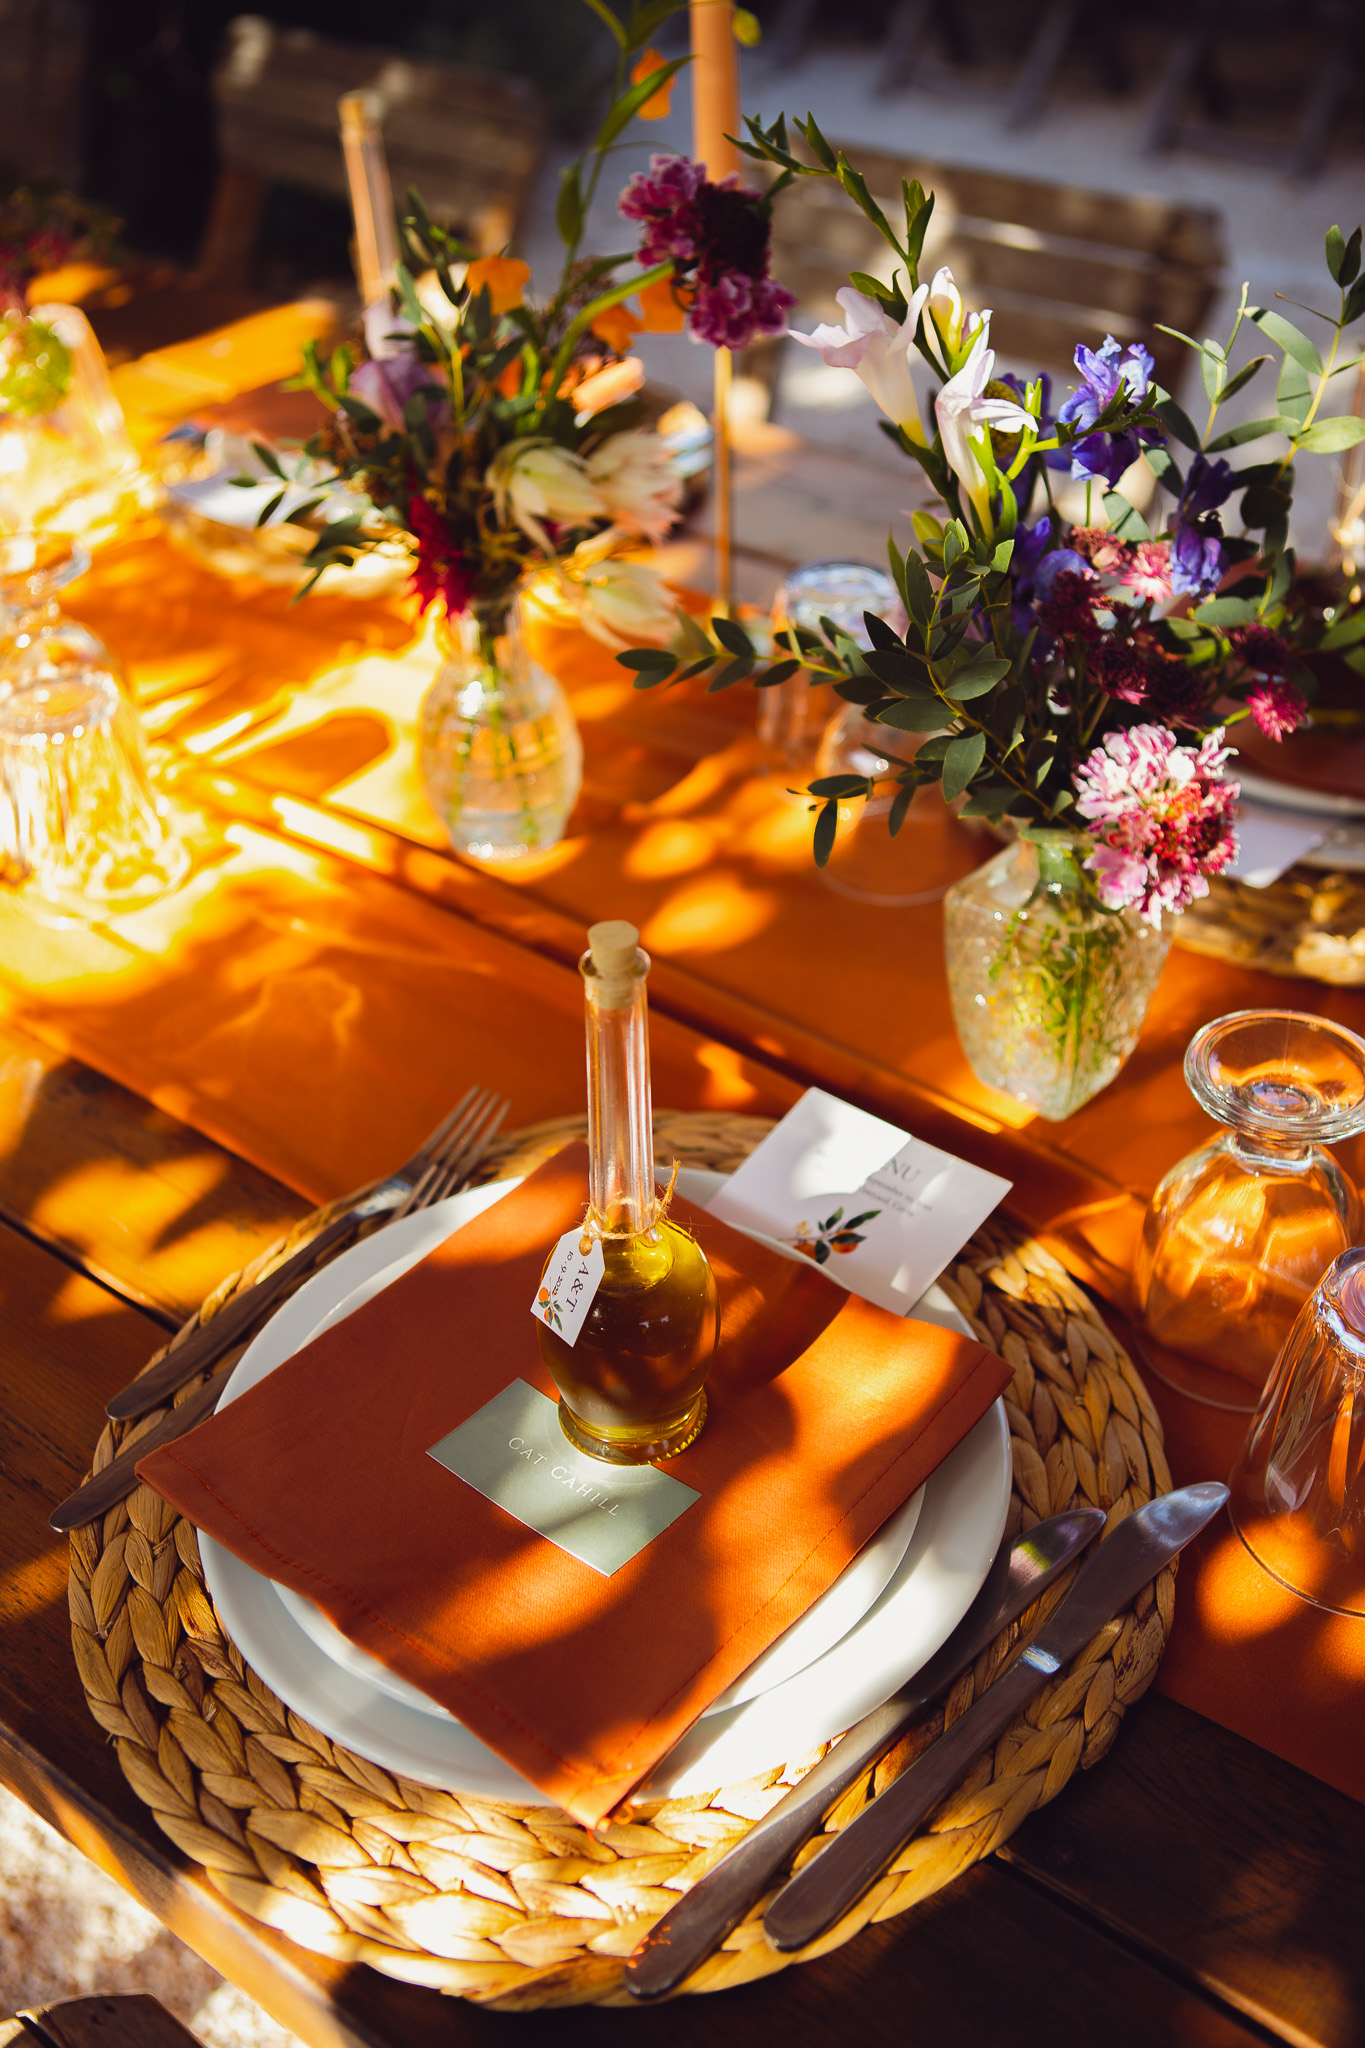 A beautiful wedding dinner place setting on a bright summer afternoon at Ambelonas Vineyard, Crete.